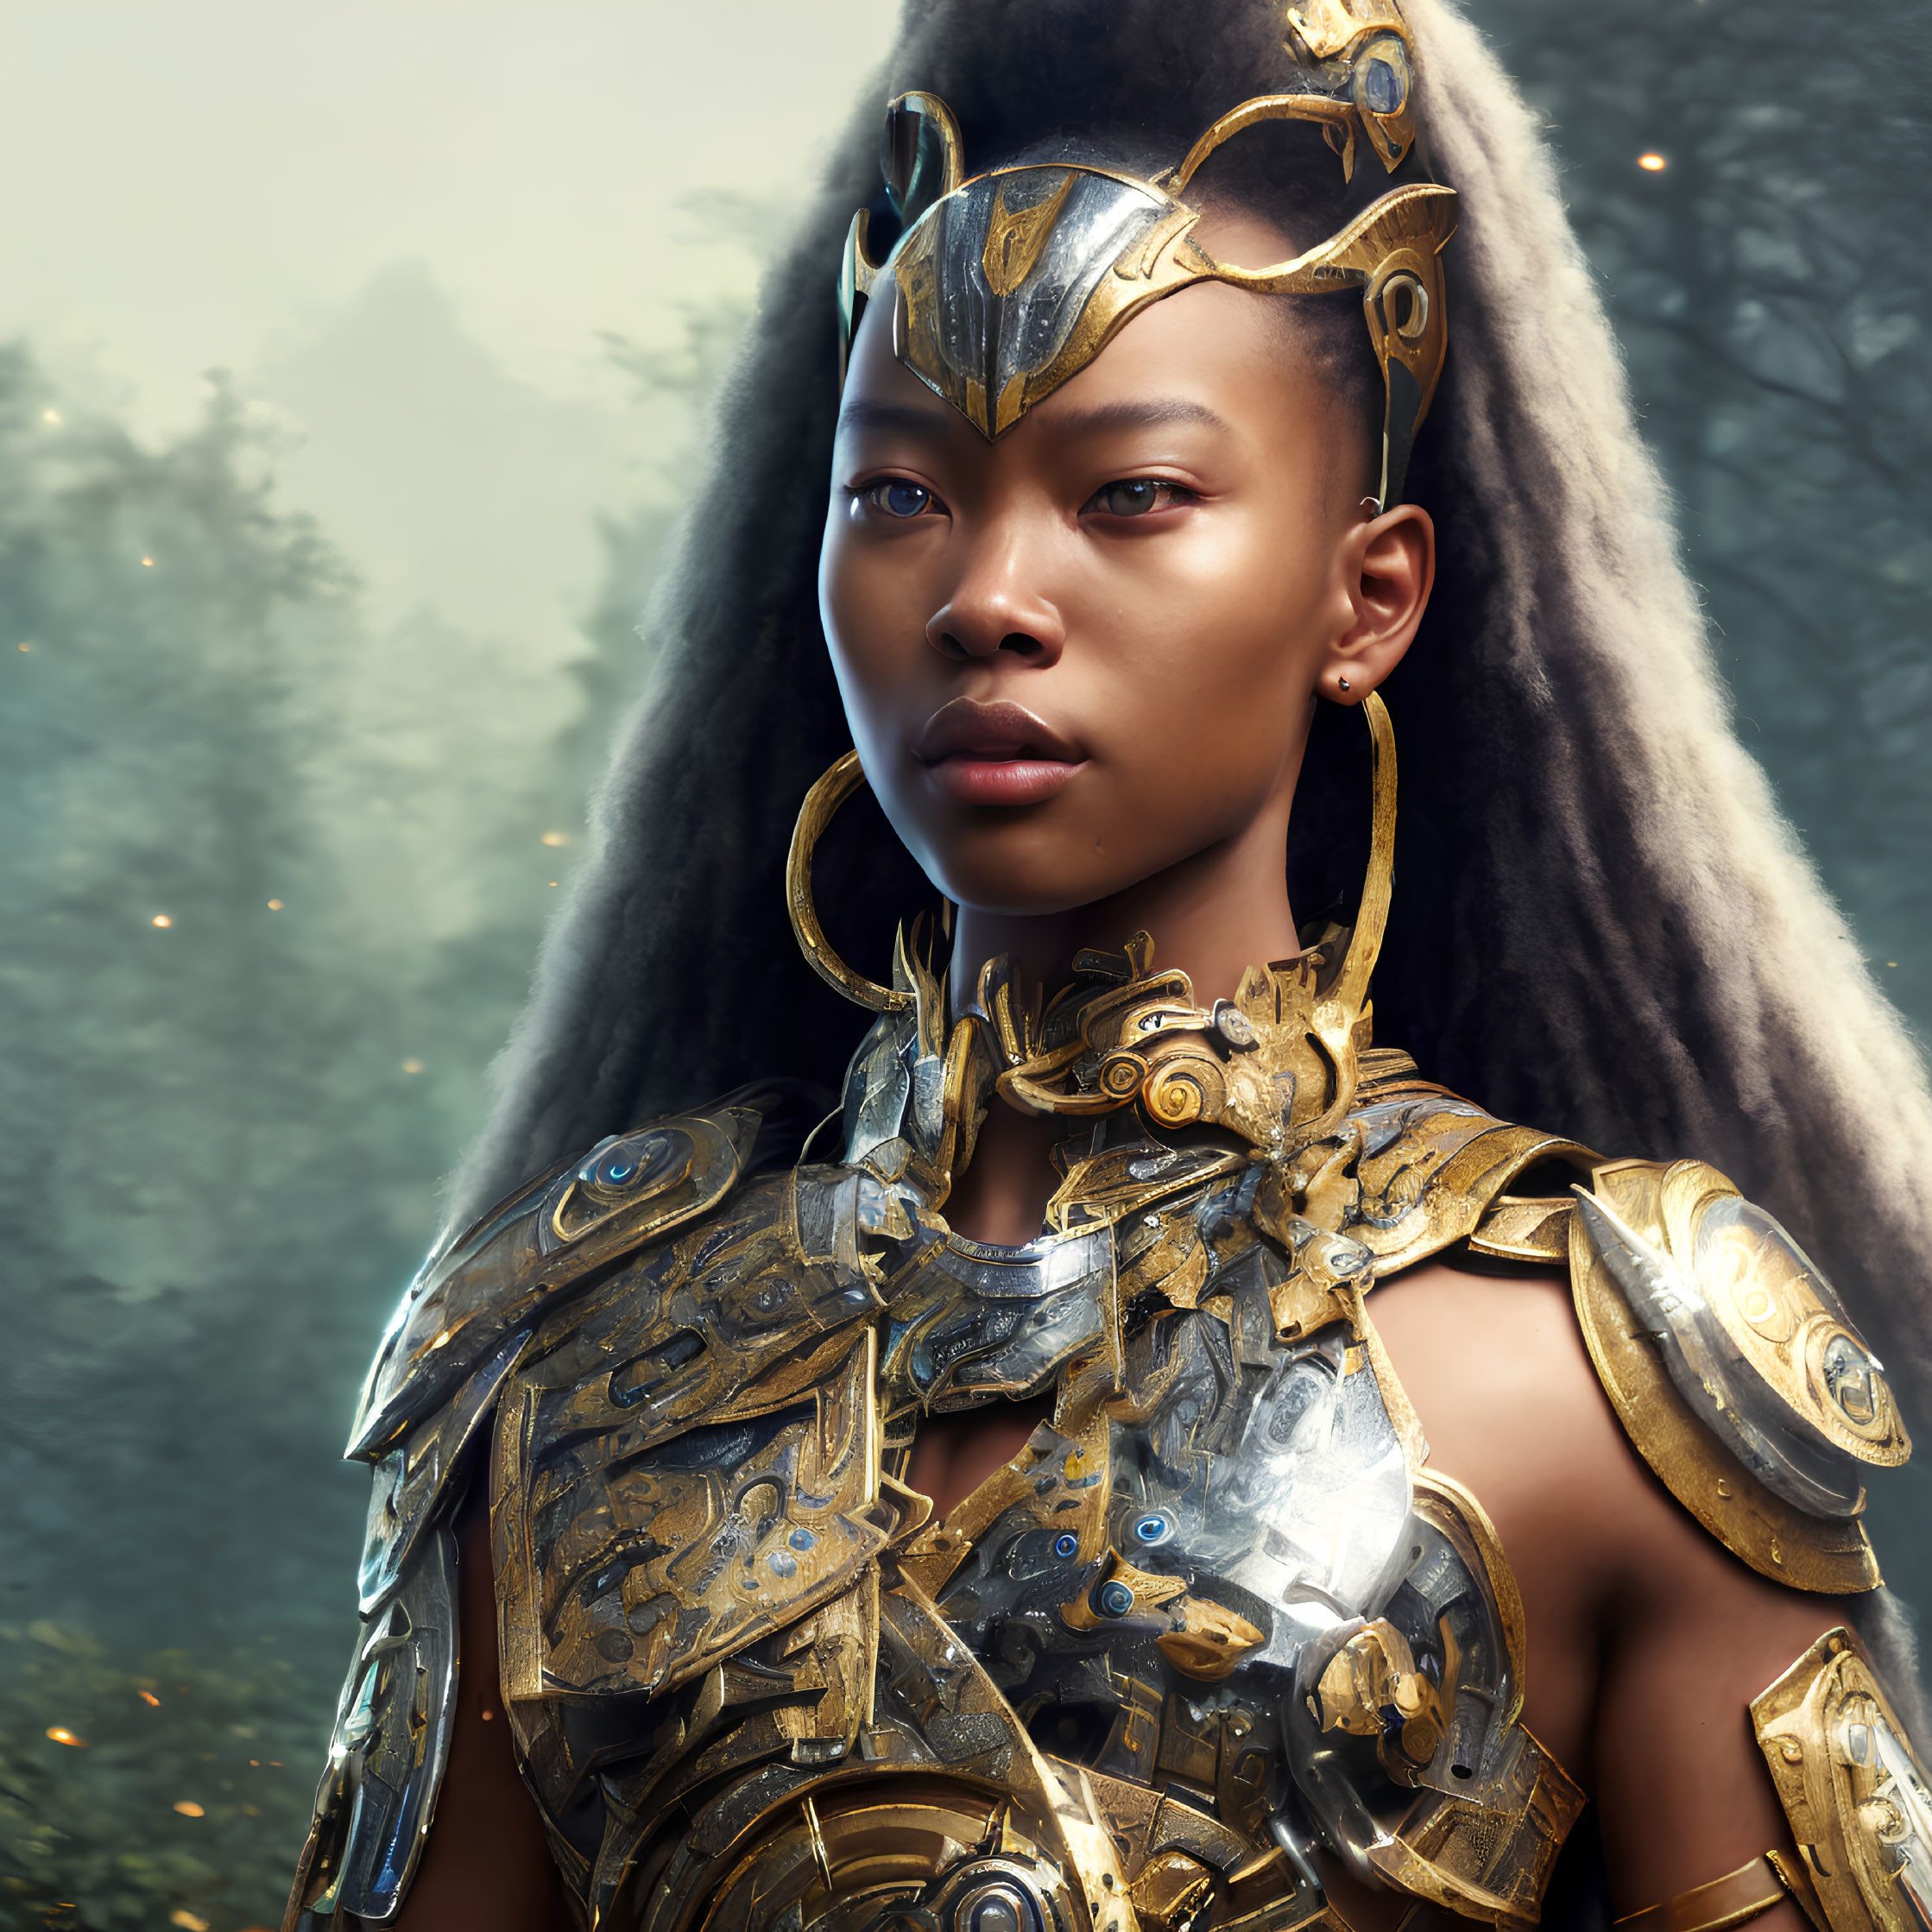 Regal woman in golden armor in mystical forest setting